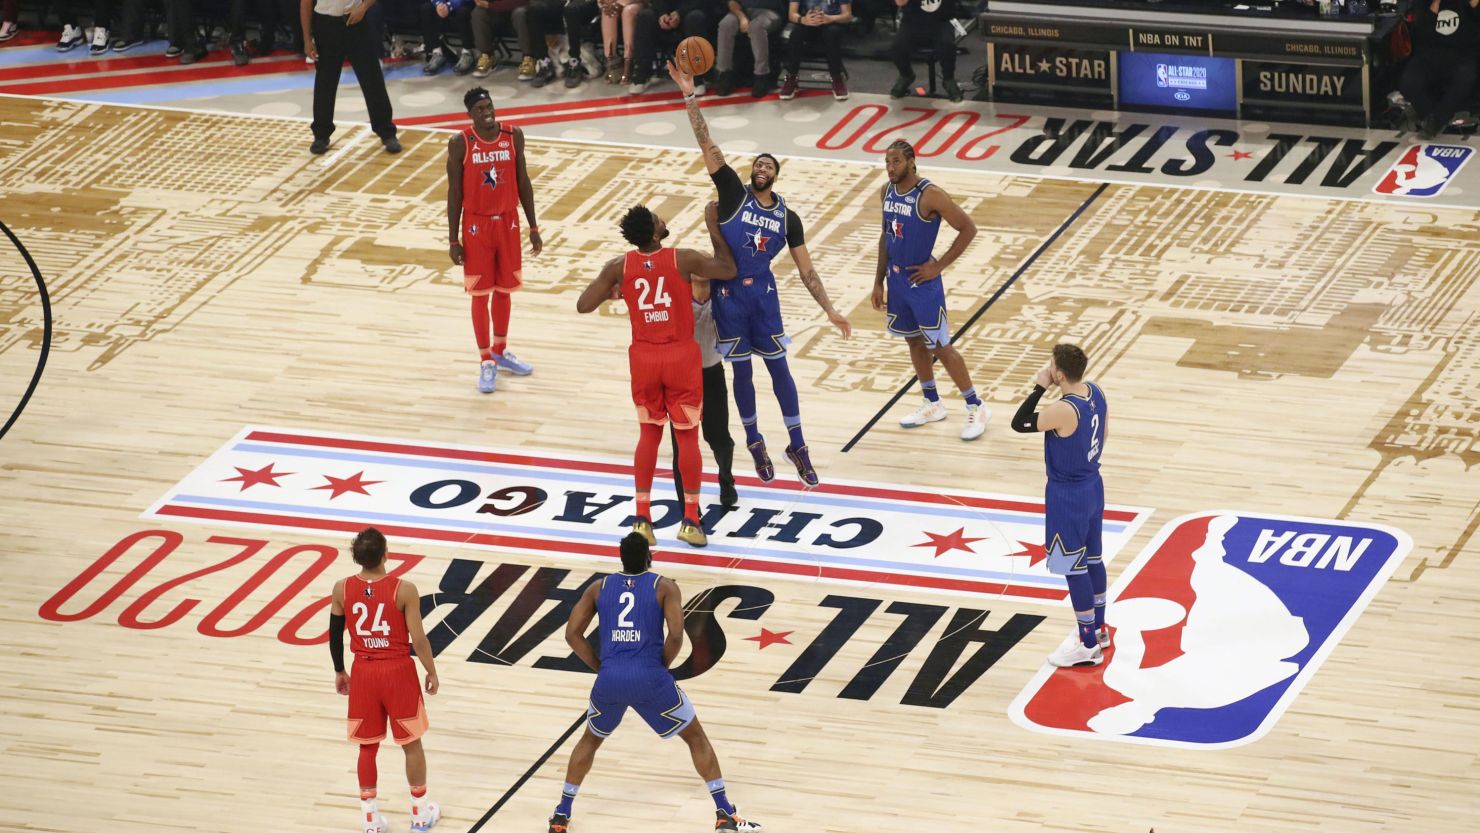 The 2021 NBA All-Star Game, featuring the league's best players, is on. It will air on Sunday, March 7 from the State Farm Arena in Atlanta. Pictured are players from the 2020 NBA All-Star Game.